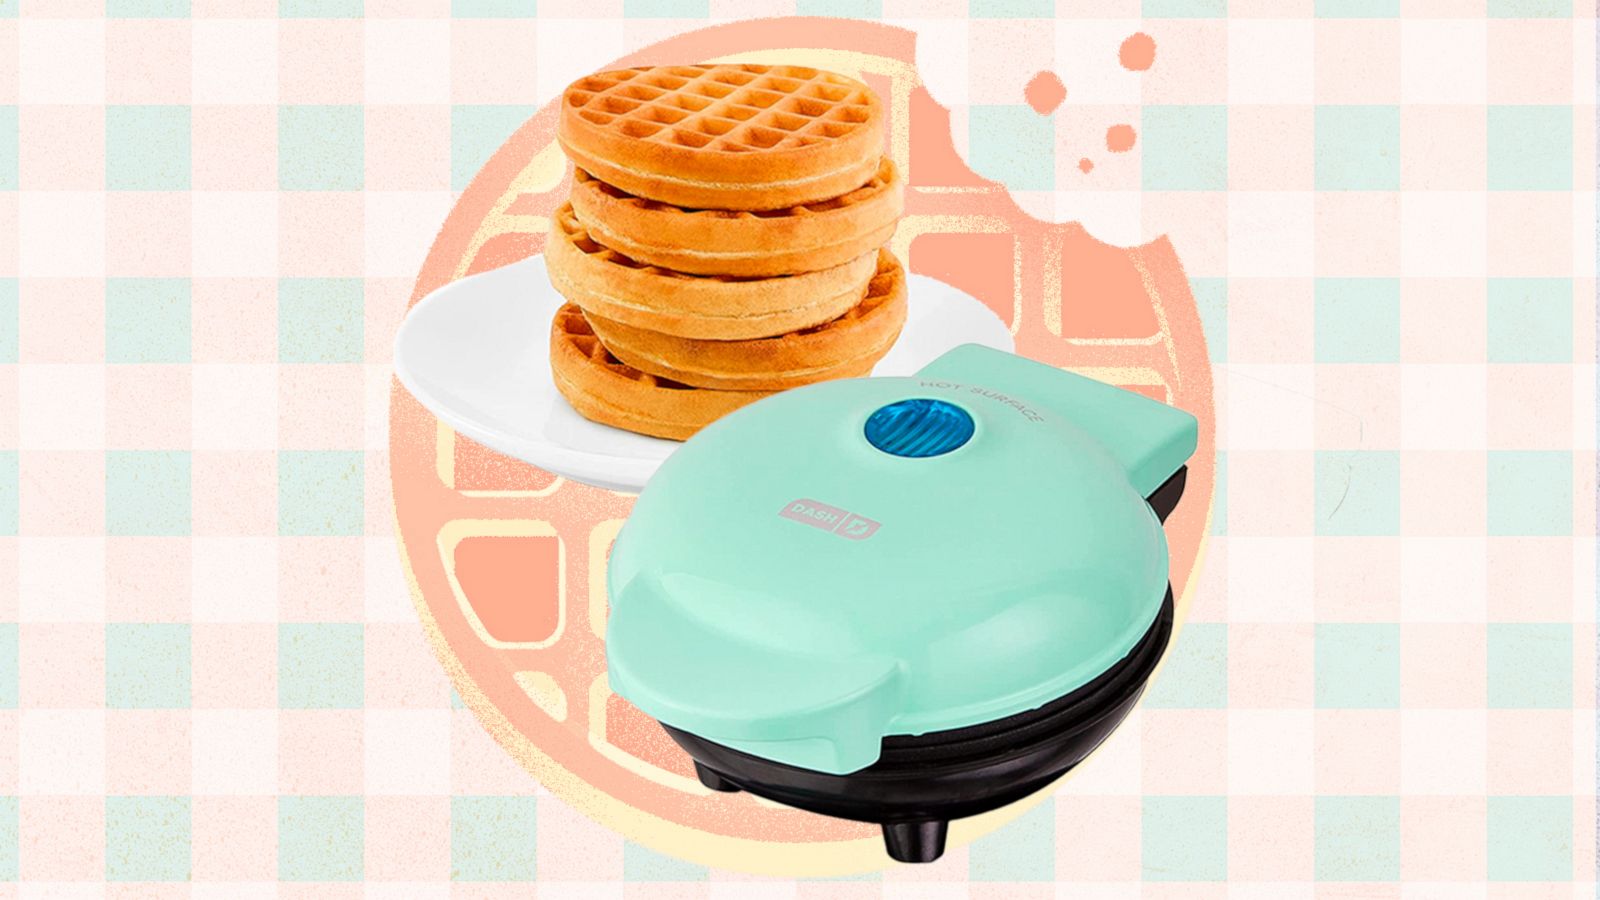 As Is Dash Set of 3 Mini Spring Shaped Waffle Maker 